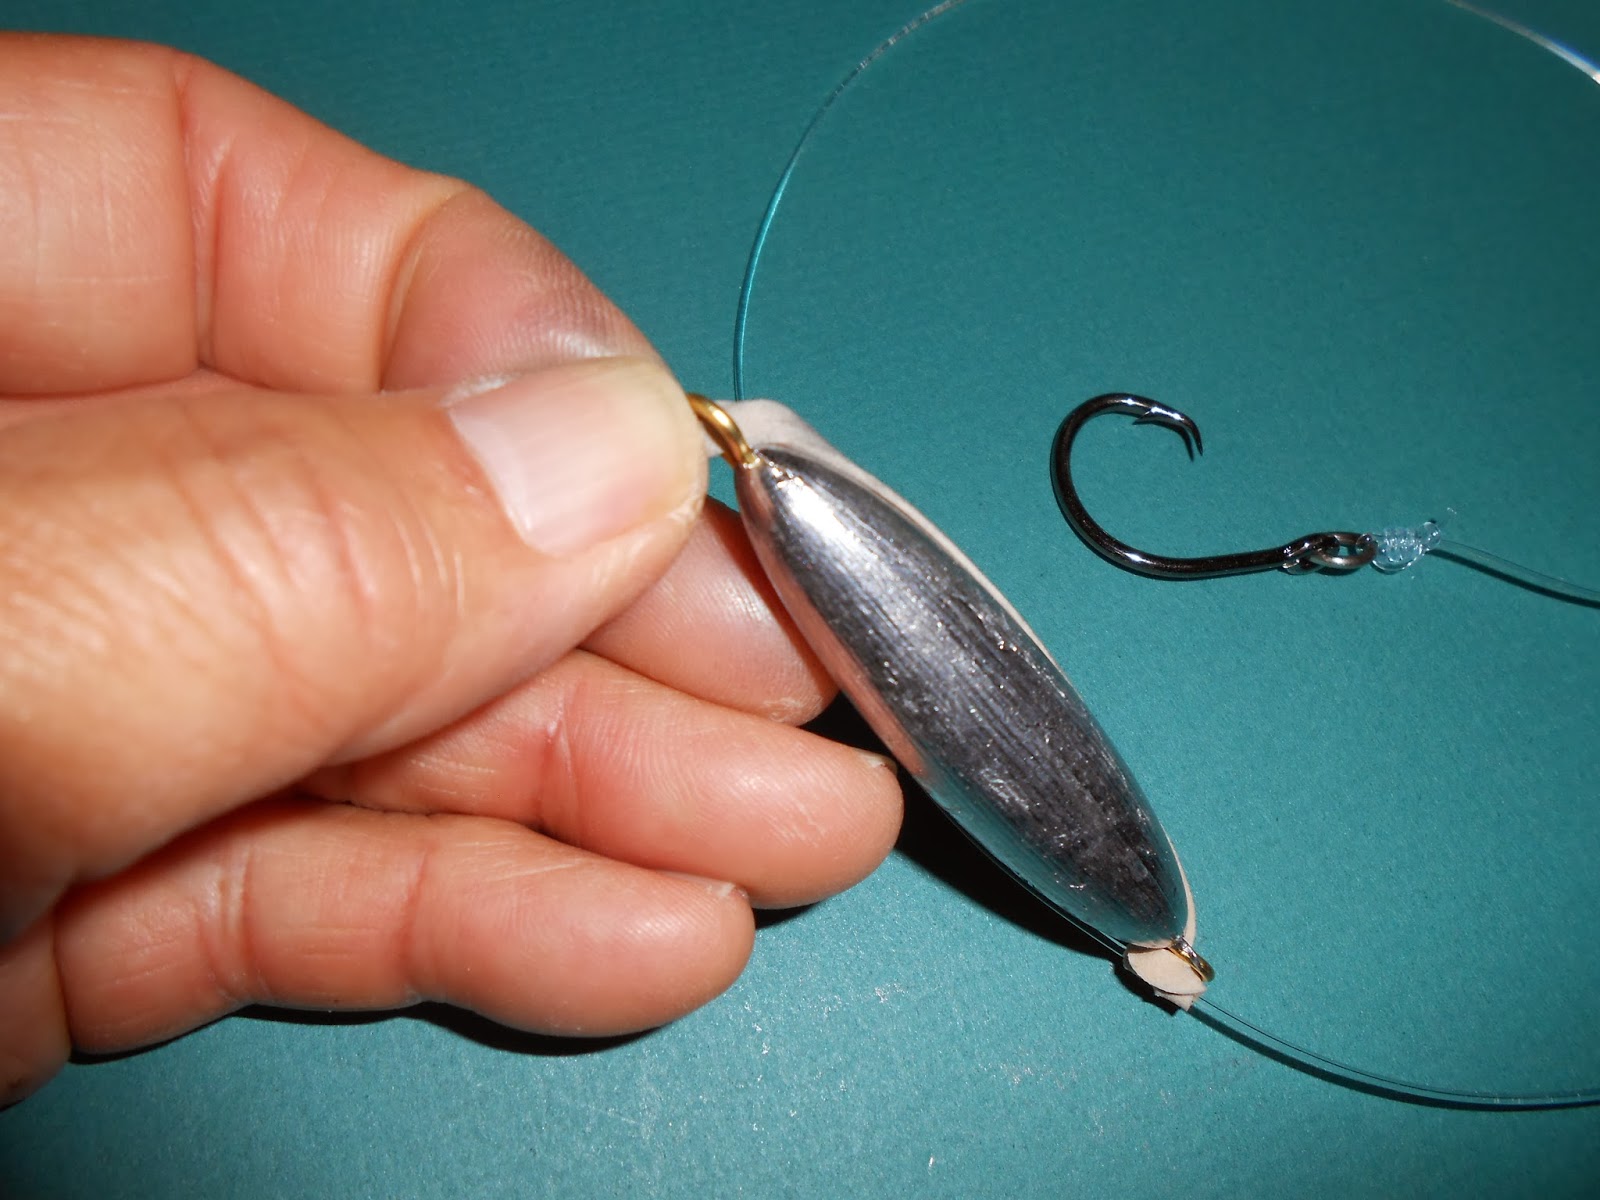 Question - Rubber band sinker rigging for tuna